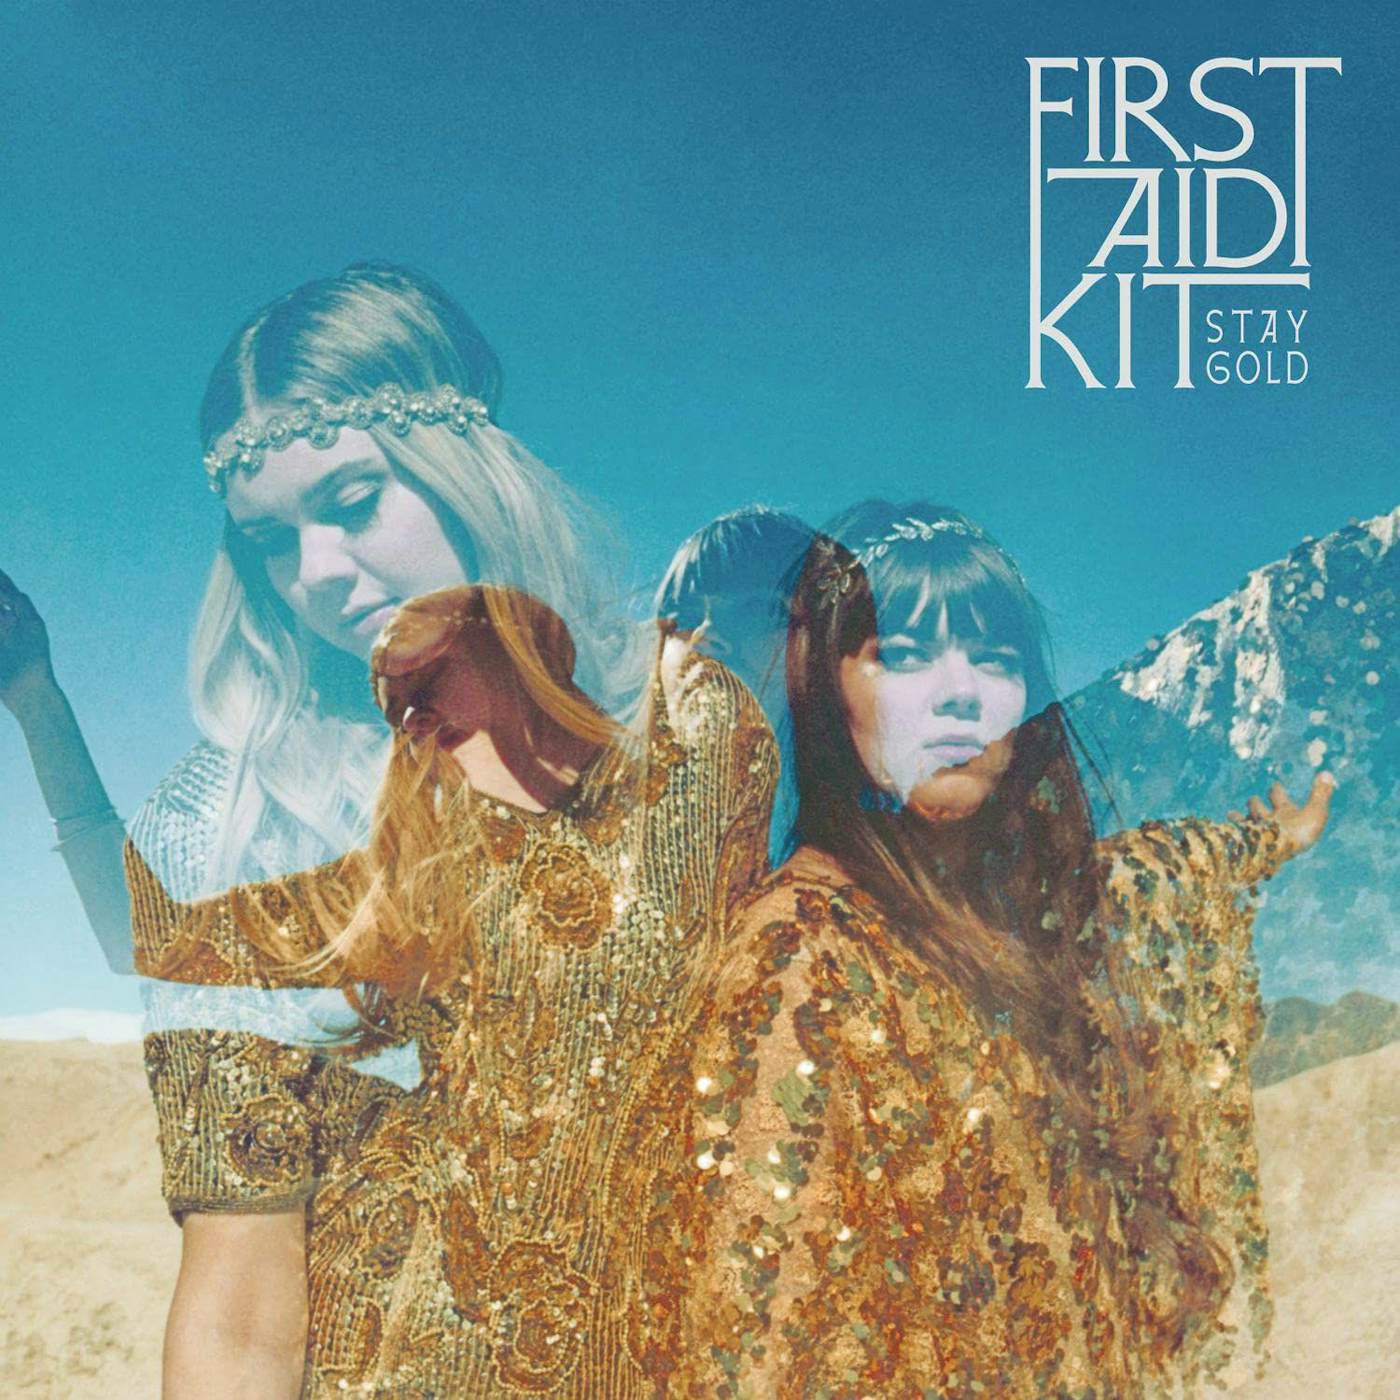 First Aid Kit Stay Gold Vinyl Record LP + CD